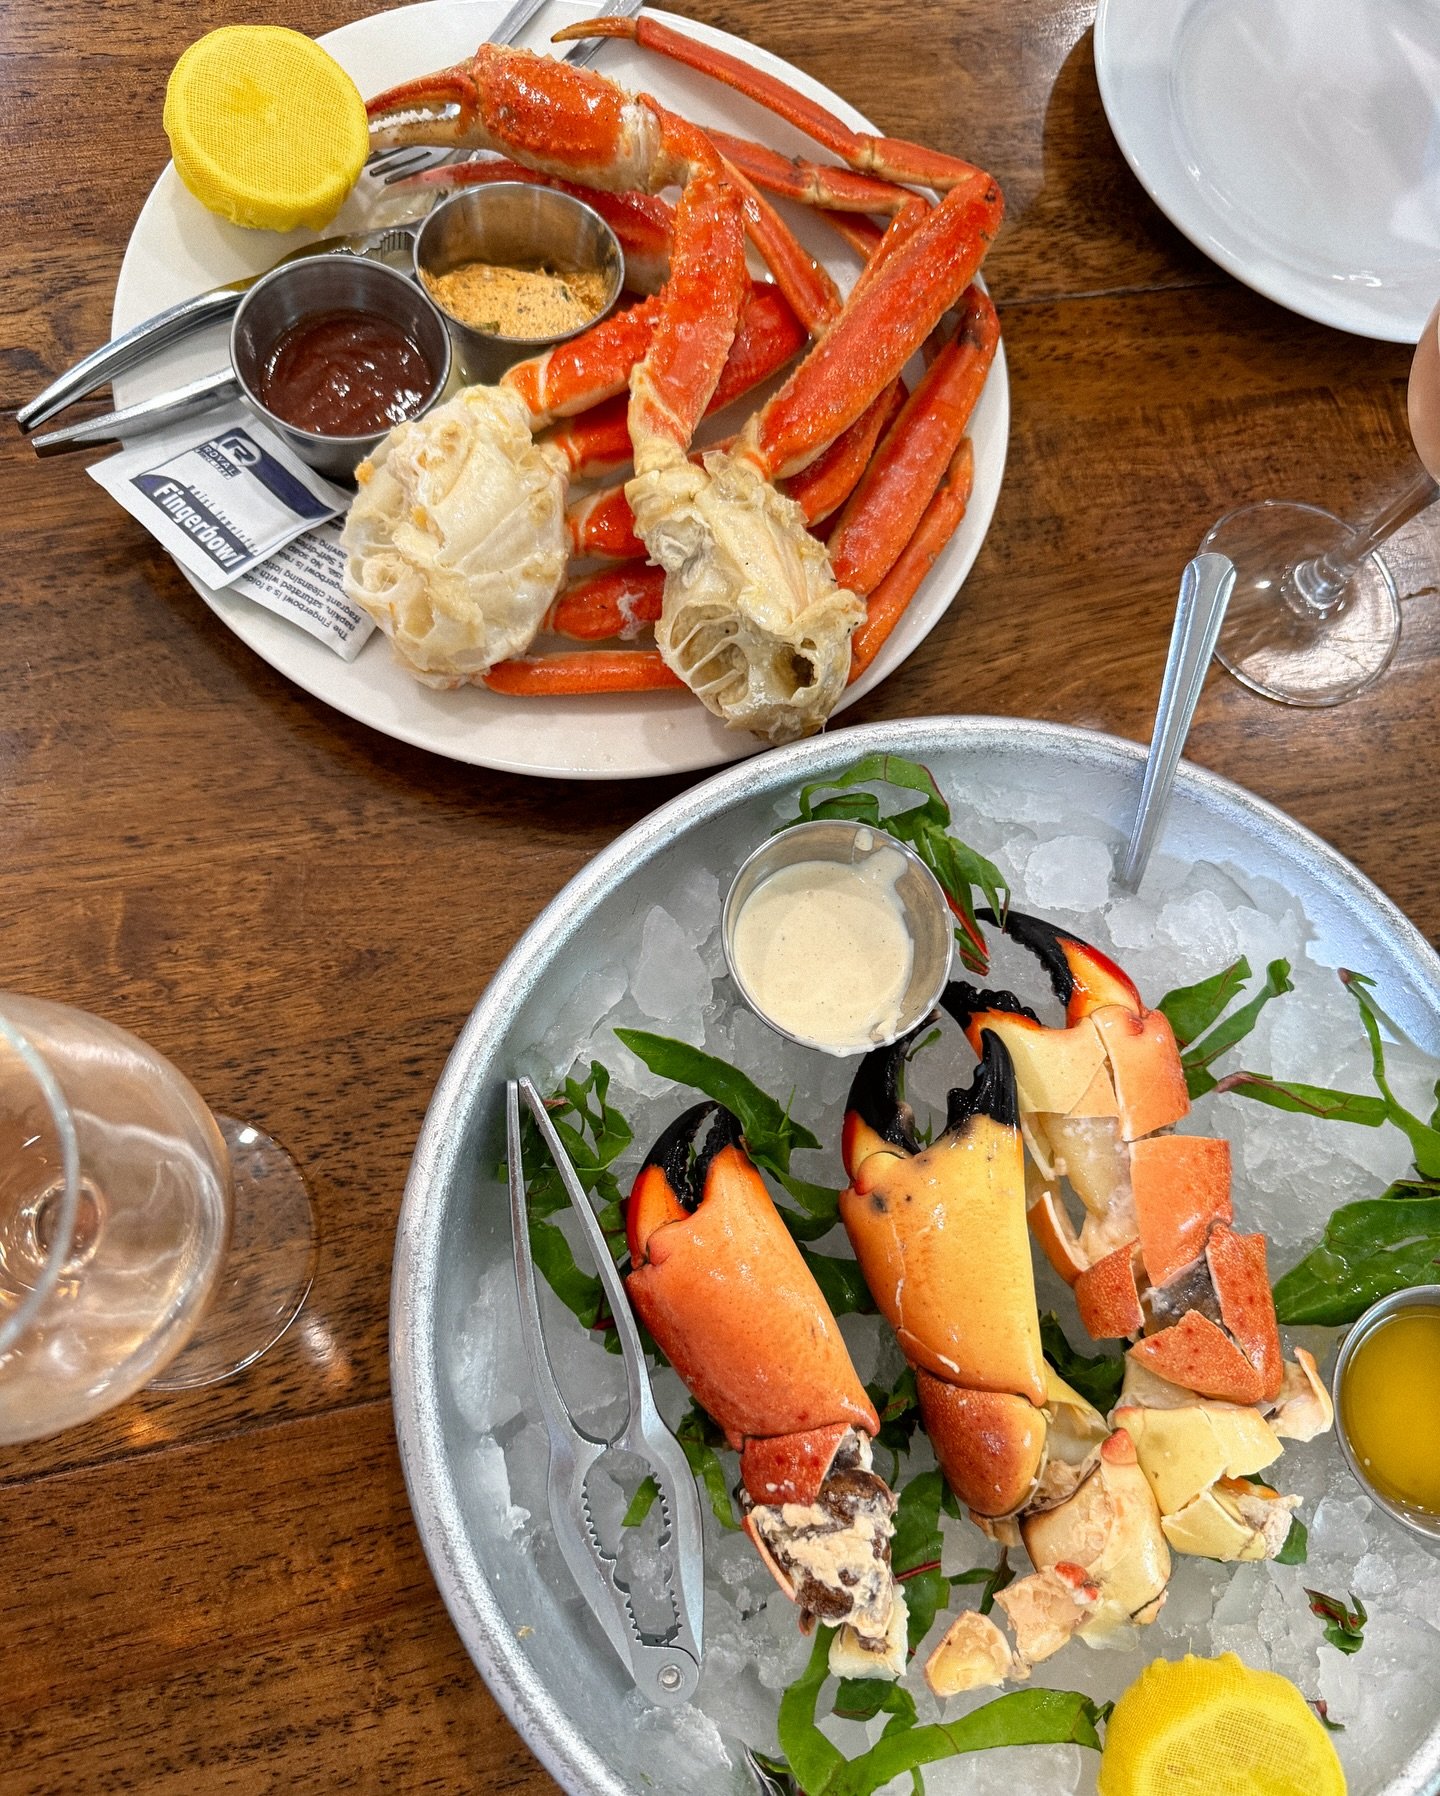 Florida Stone Crab Season is coming to an end. Come get 'em while you can! 🦀 

📸: @thisbabeeats 

#TheTidesMarket #StoneCrab #SafetyHarbor #TampaEats #LoveFL